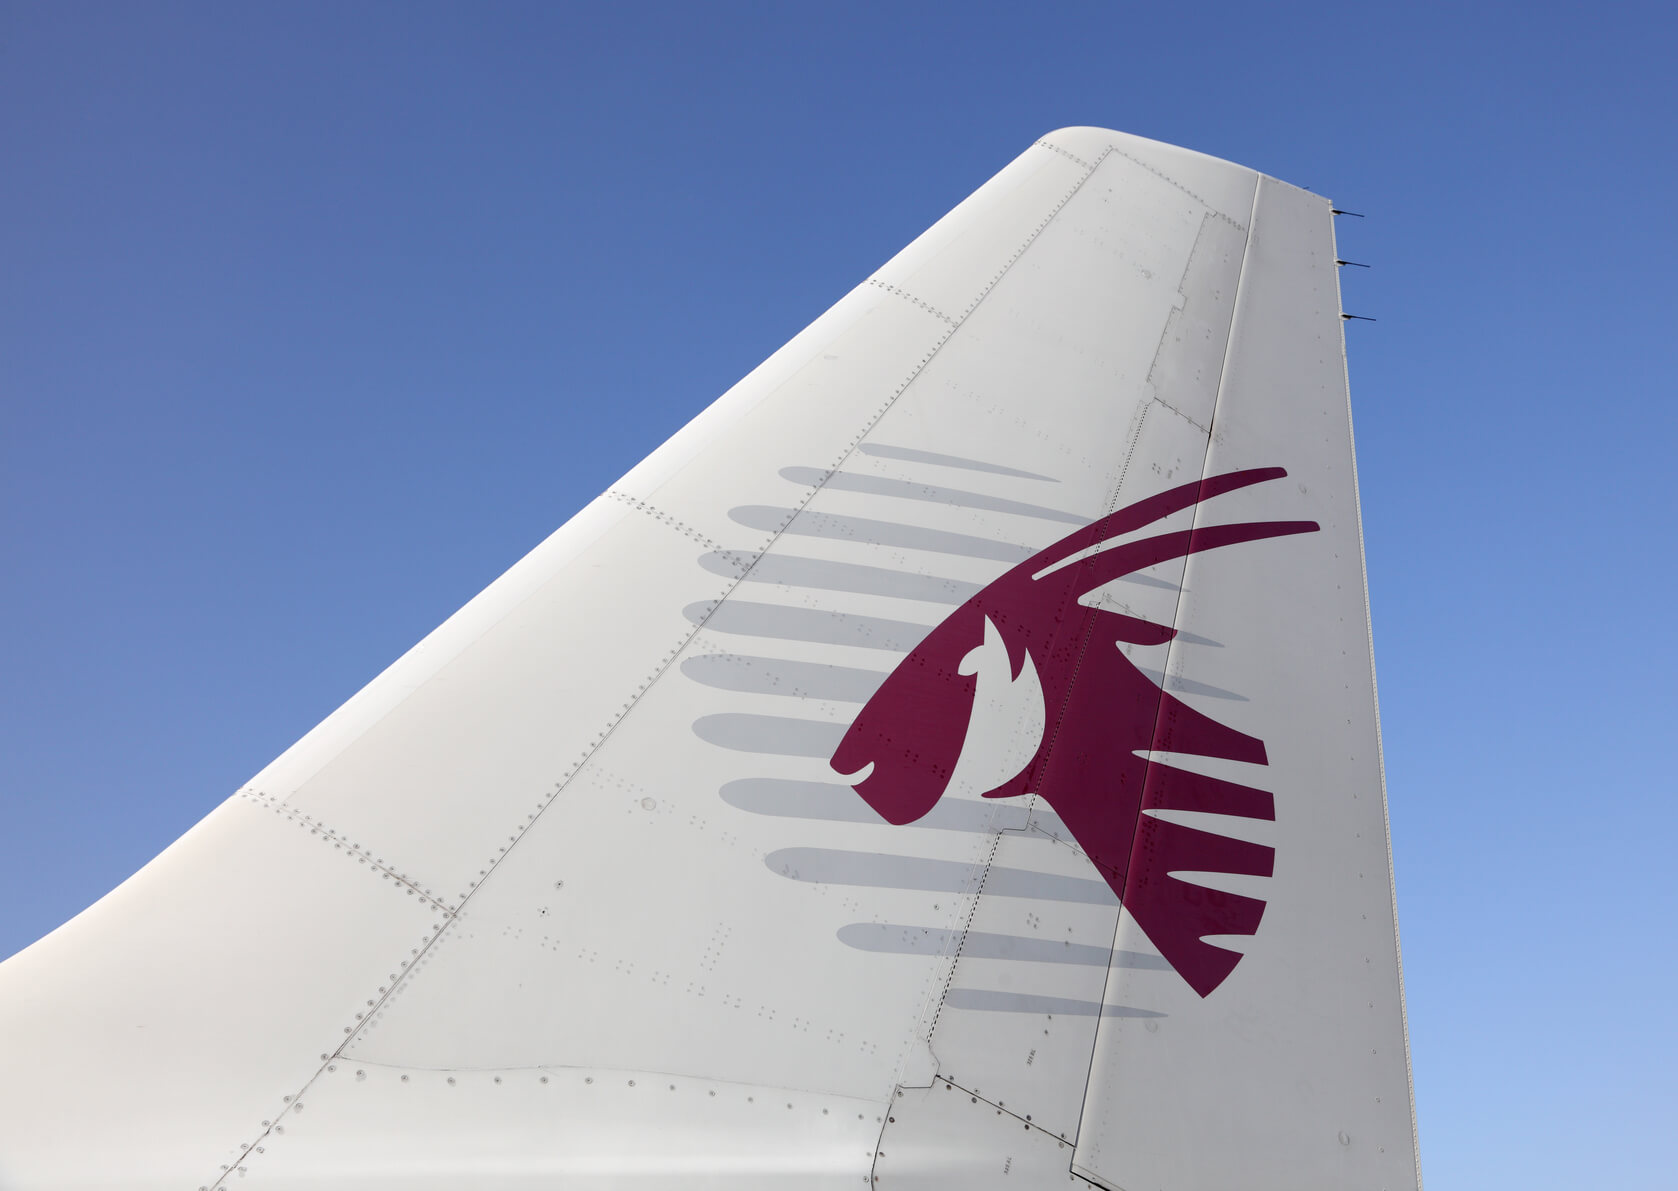 <div class='expired'>EXPIRED</div>PROMO CODE: Up to 20% off Qatar Airways flights departing the USA | Secret Flying